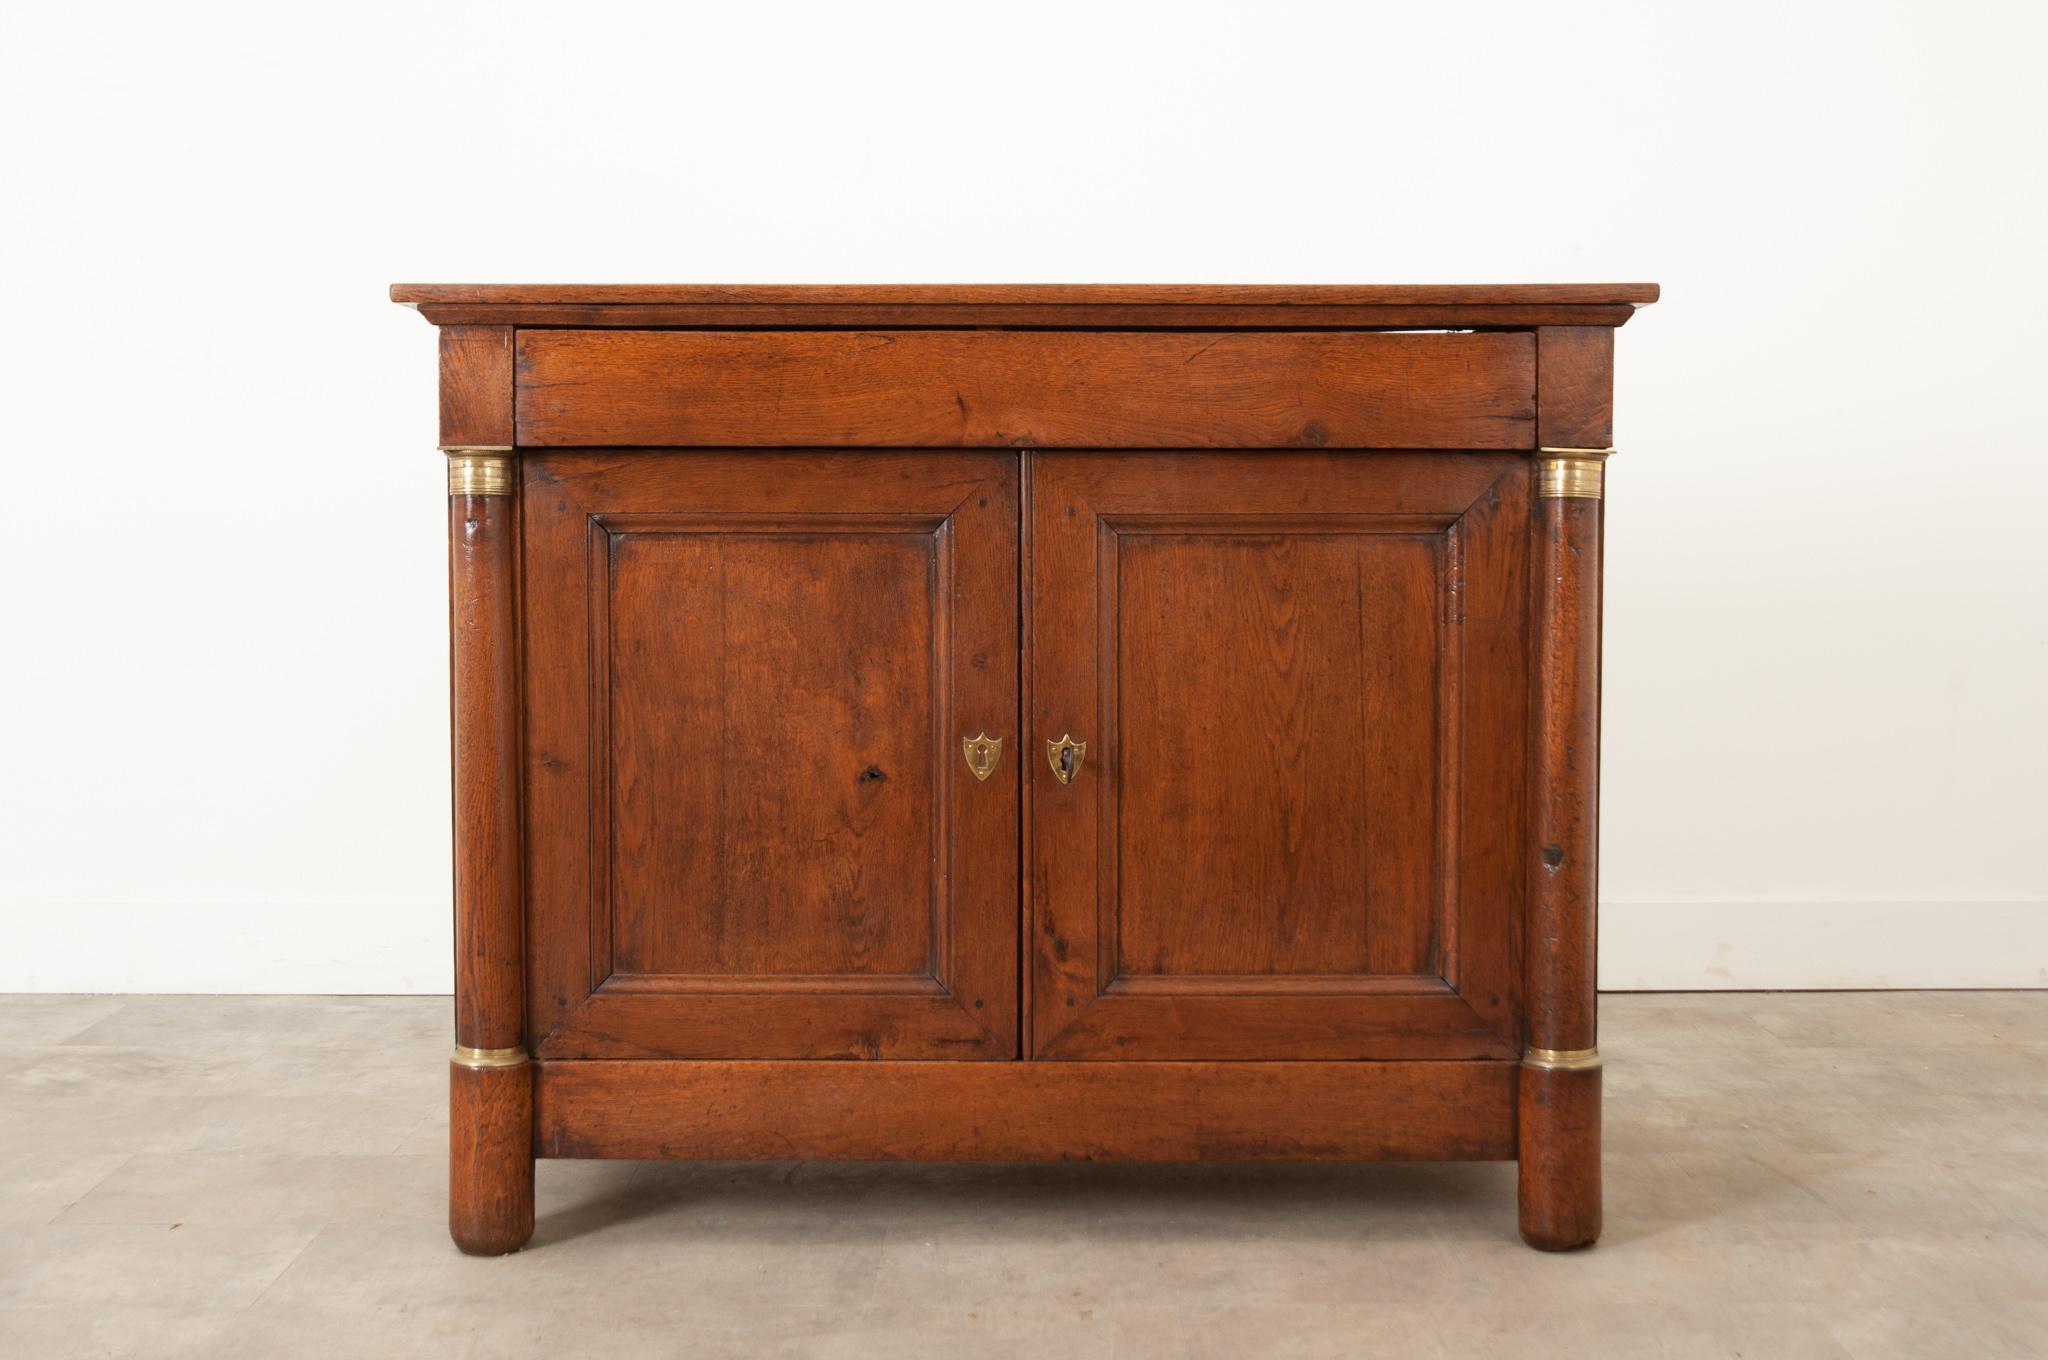 A more primitive Empire buffet made of solid oak is in wonderful antique condition. A long single drawer is located under the simple top. A pair of paneled doors are flanked by columns capped with gilt bronze ormolu at the top and bottom. Shield